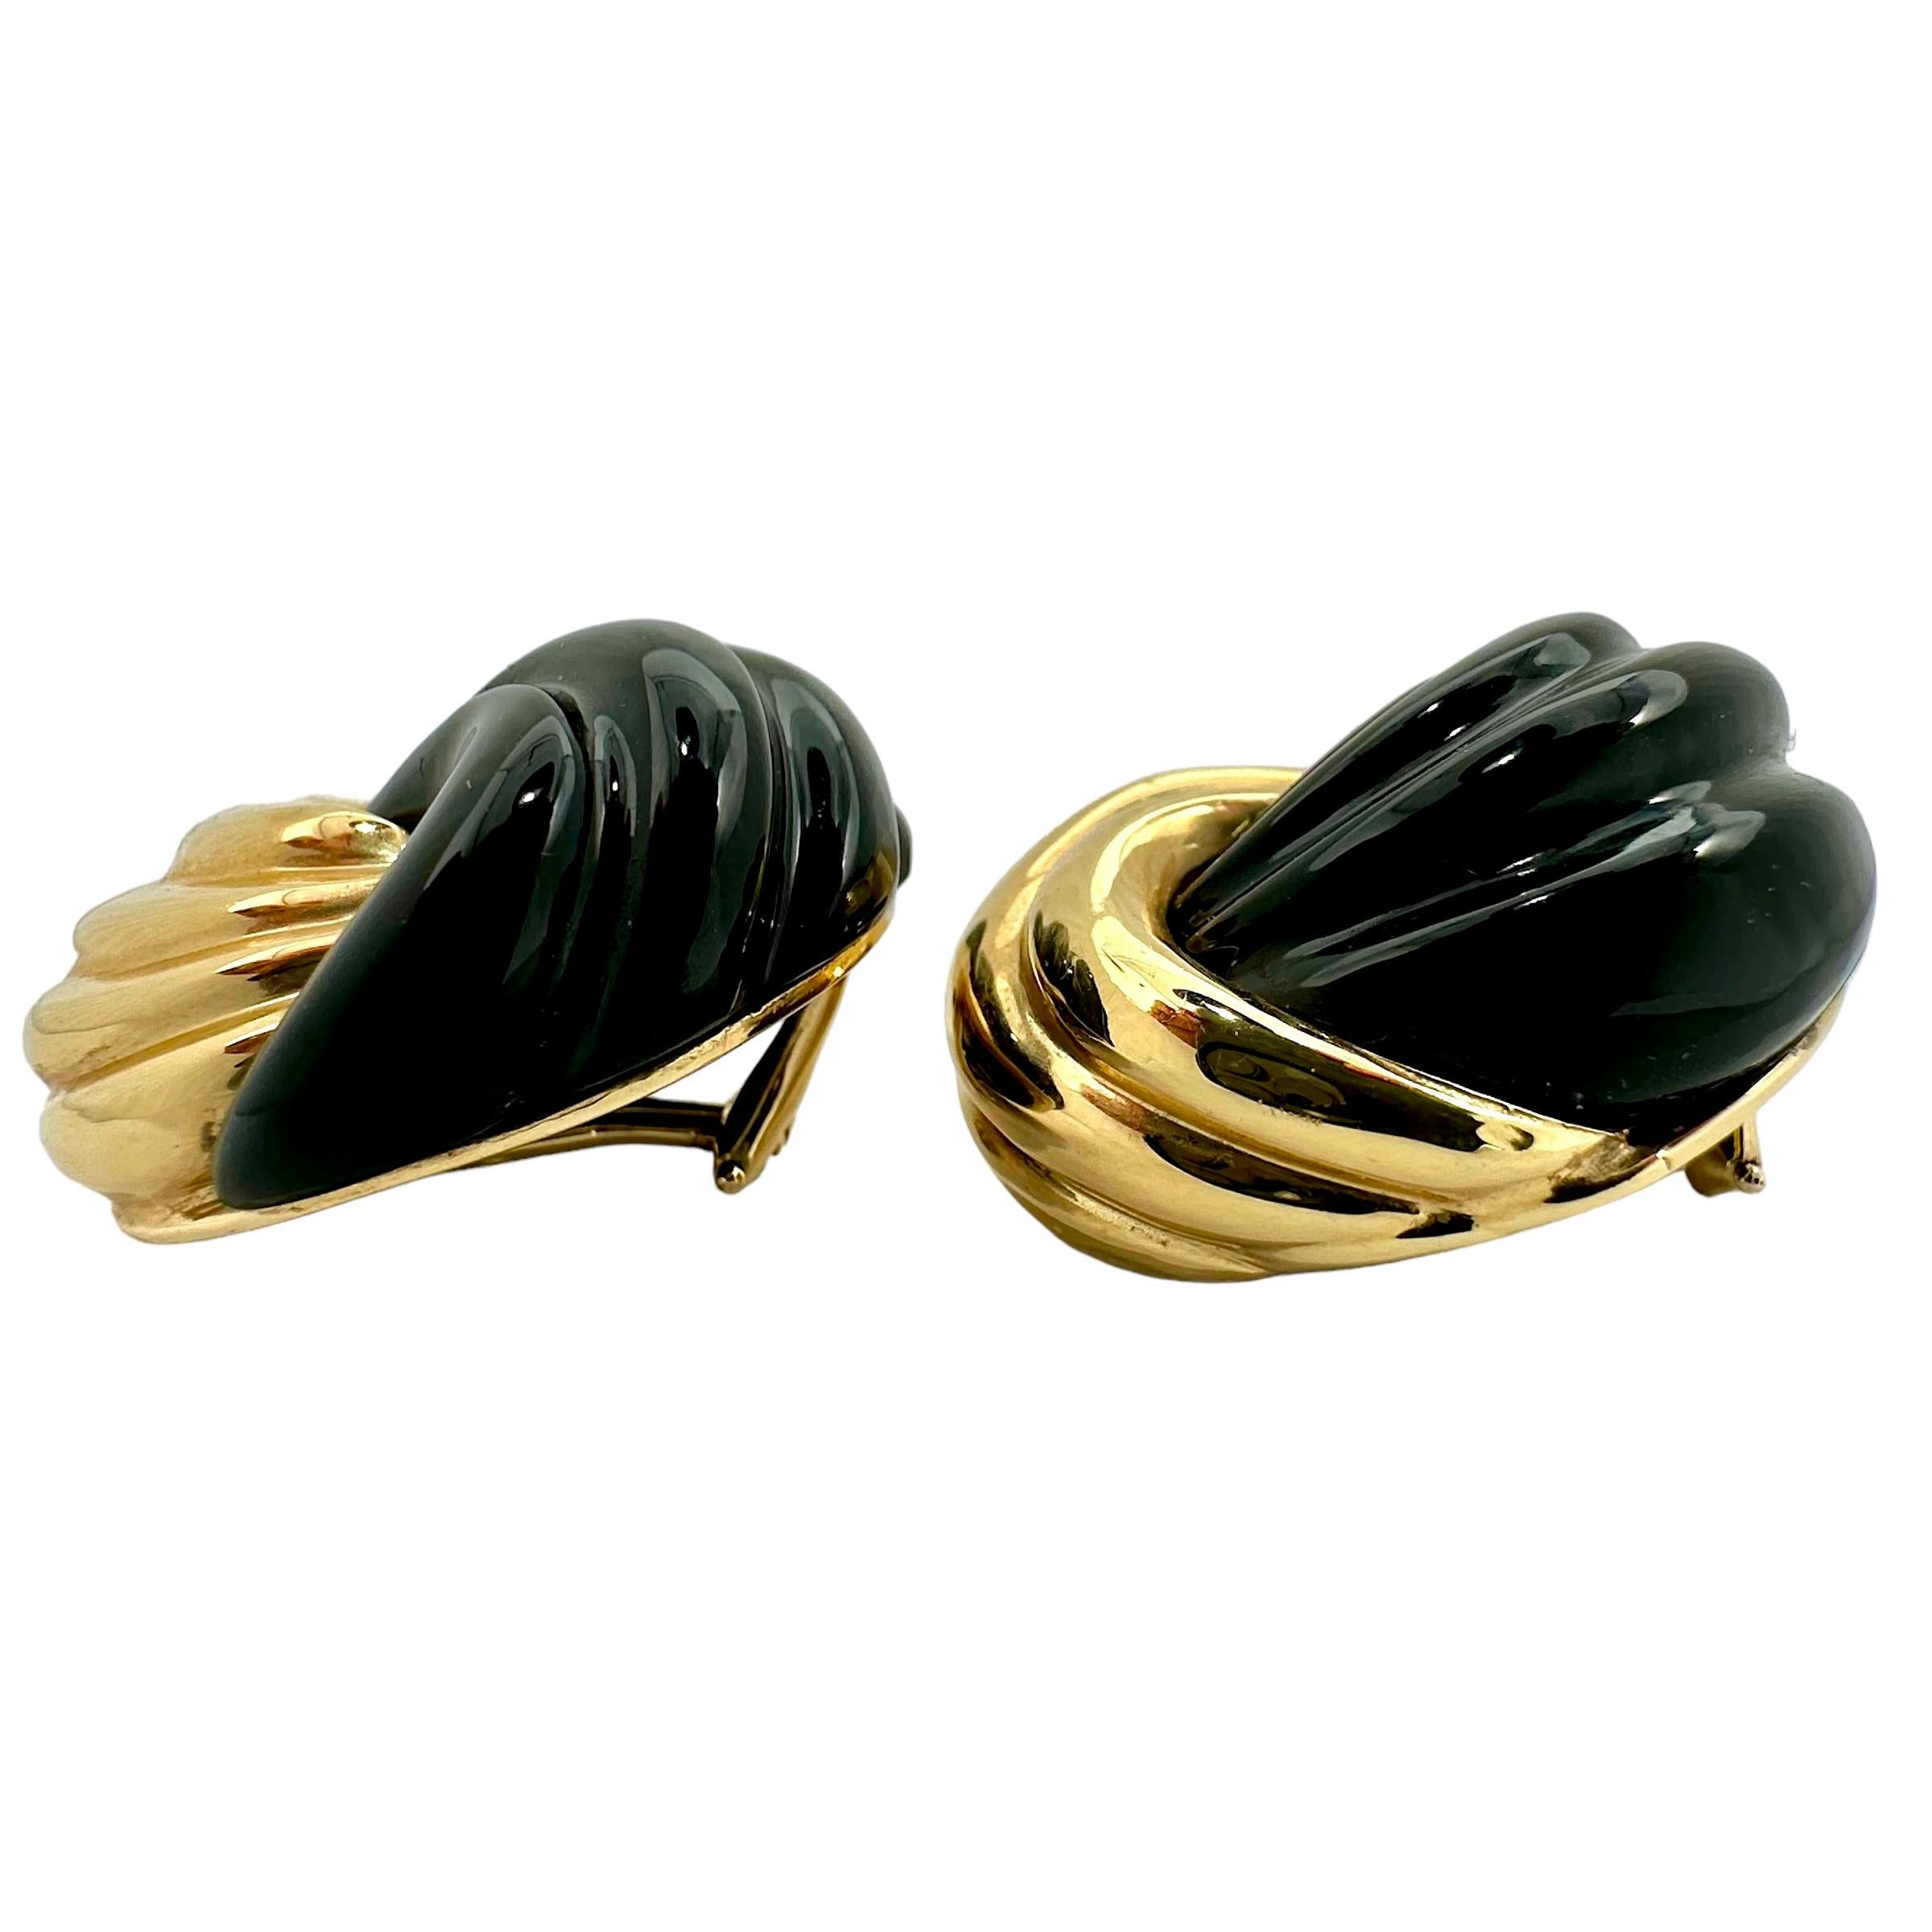 Modern Vintage Fluted 14K Yellow Gold and Black Onyx Knot  Earrings by Designer Maz For Sale